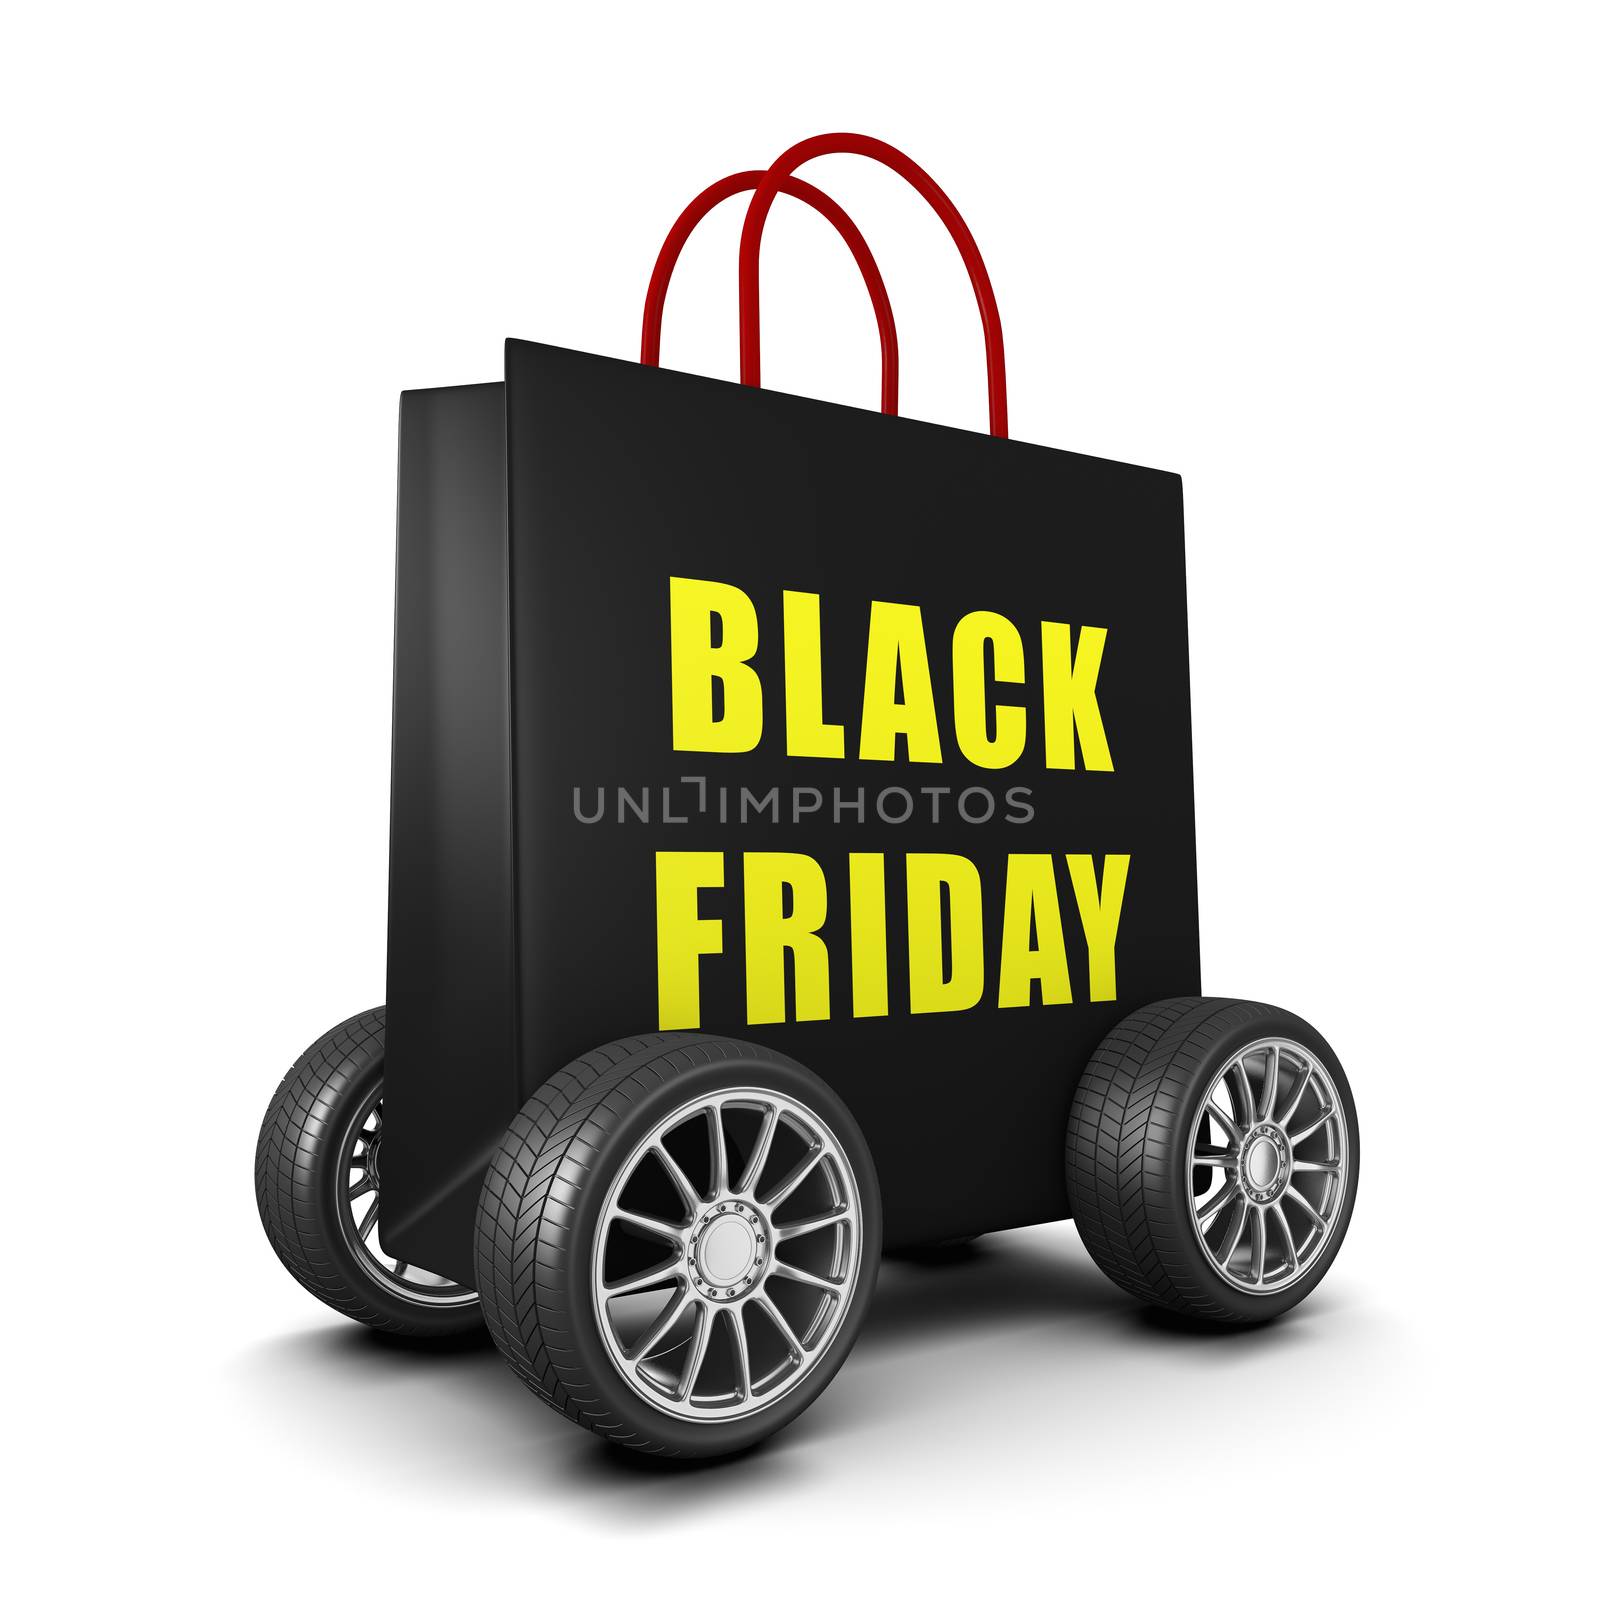 Black Shopping Bag on Wheels with Black Friday Text by make